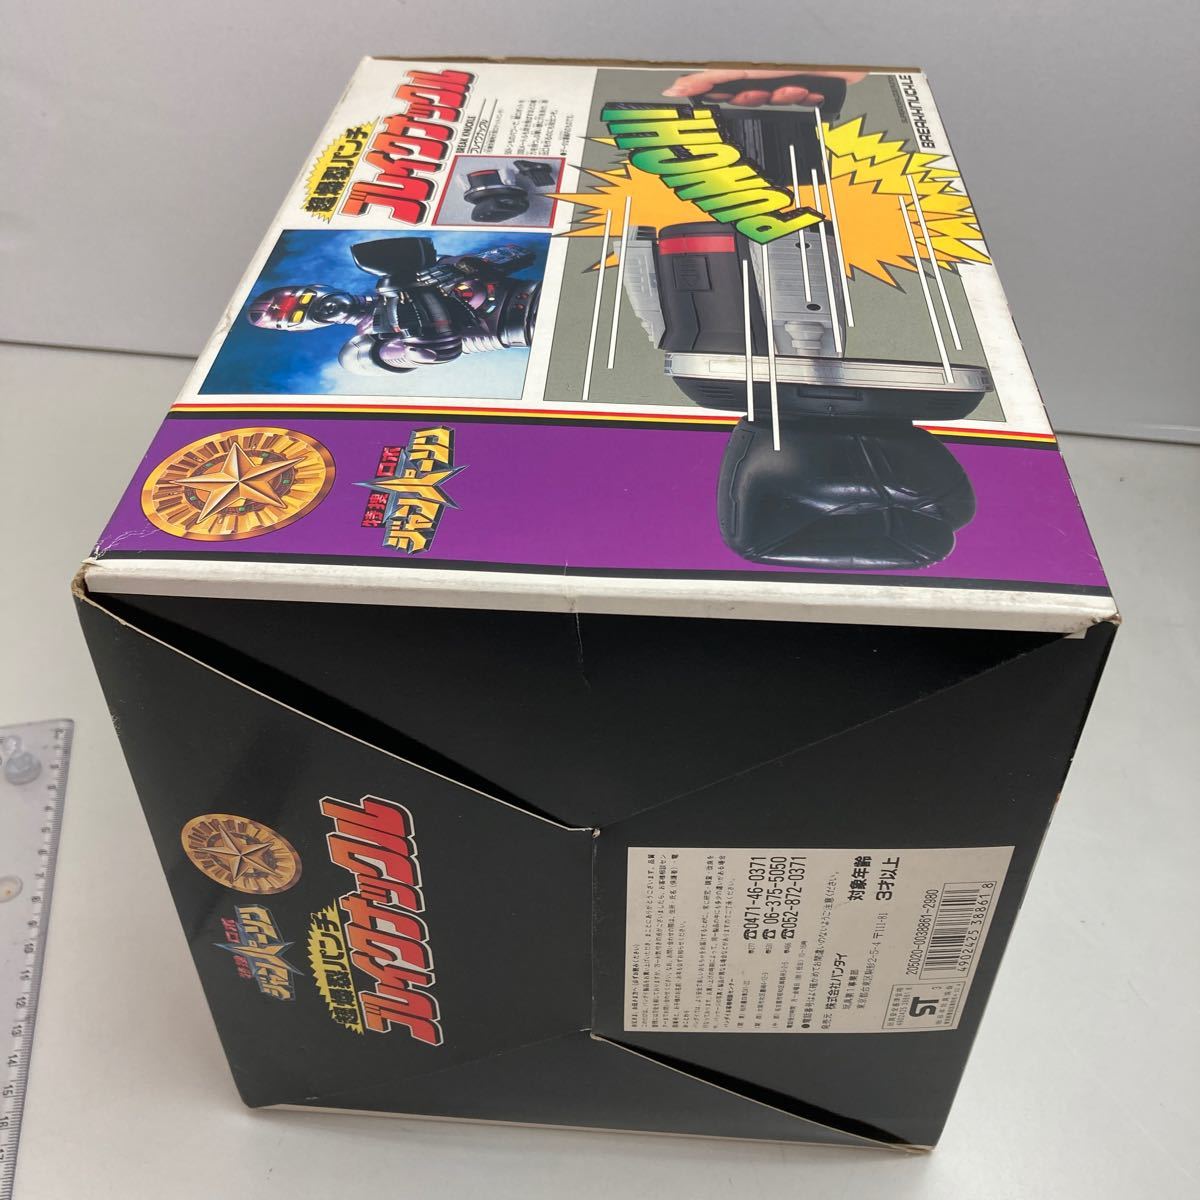 * rare goods *BANDAI* Tokusou Robo Janperson * break Knuckle *MADE.IN.JP*1993 year * that time thing * unused goods * beautiful goods * Showa Retro * out of print * rare 